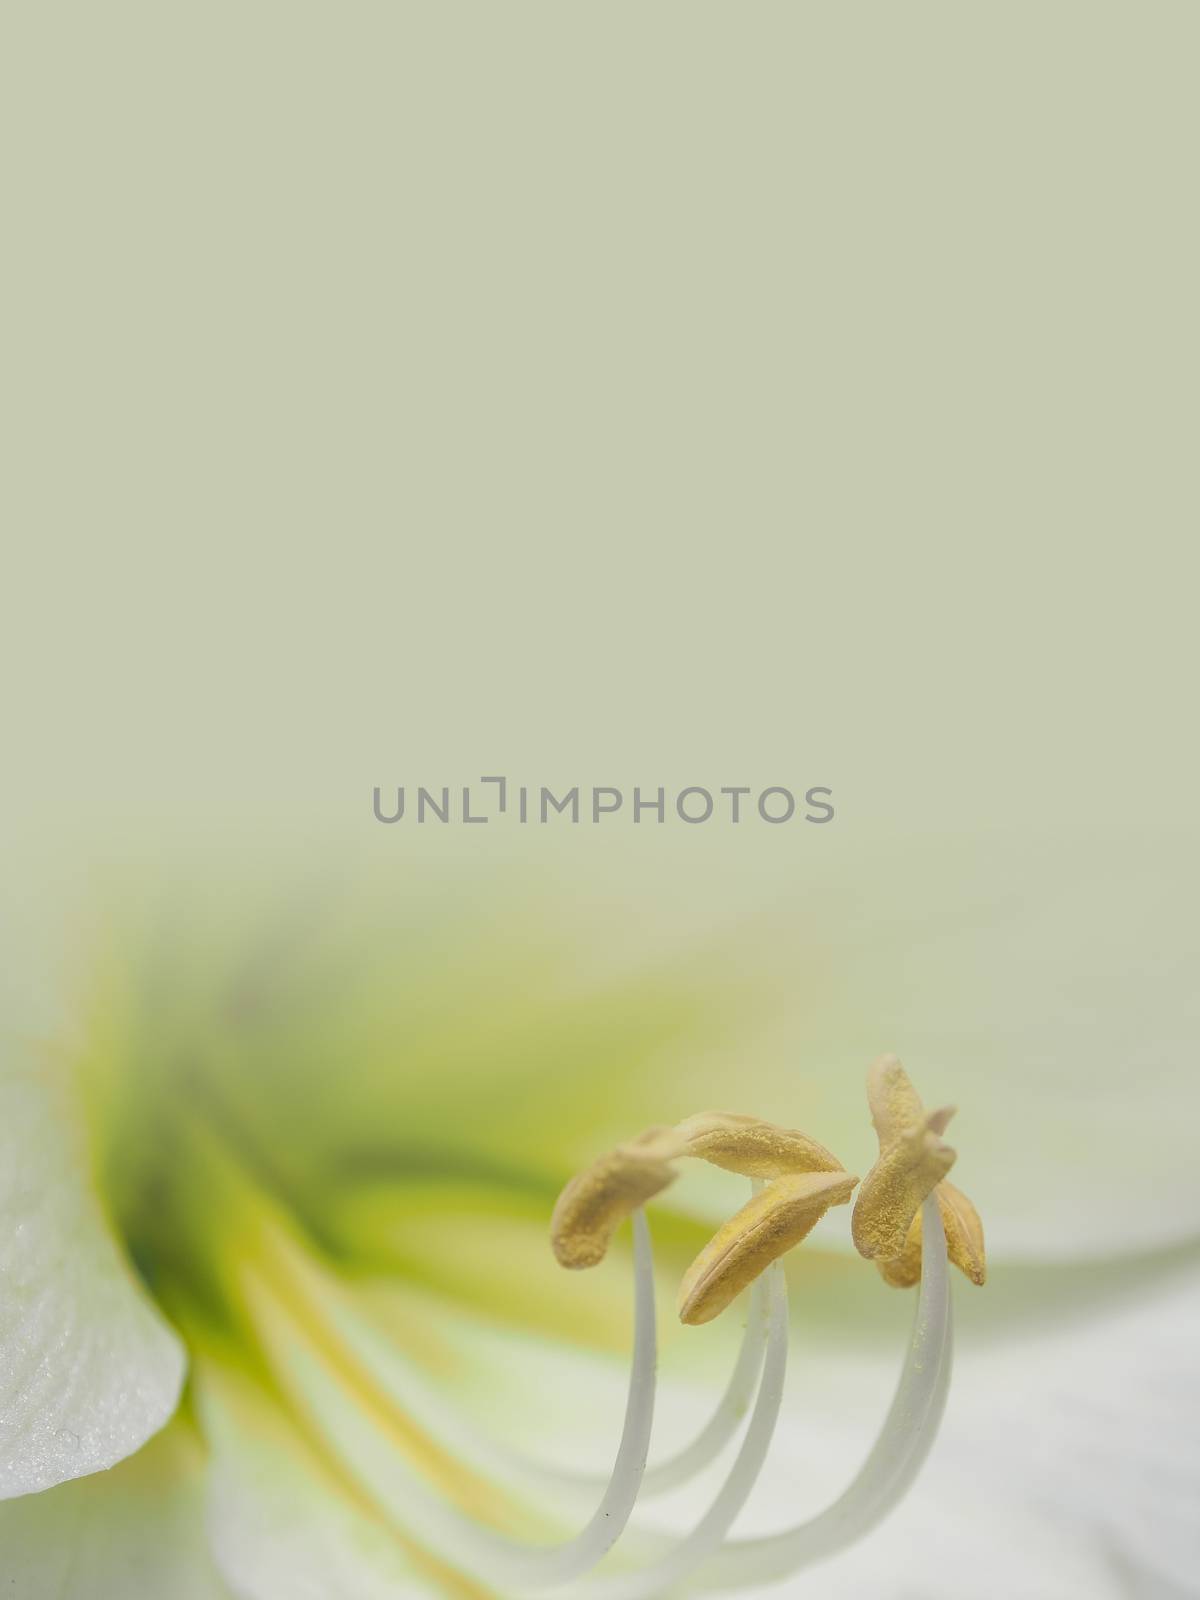 white lily flower with orange pollen made as abstract flower background illustration.